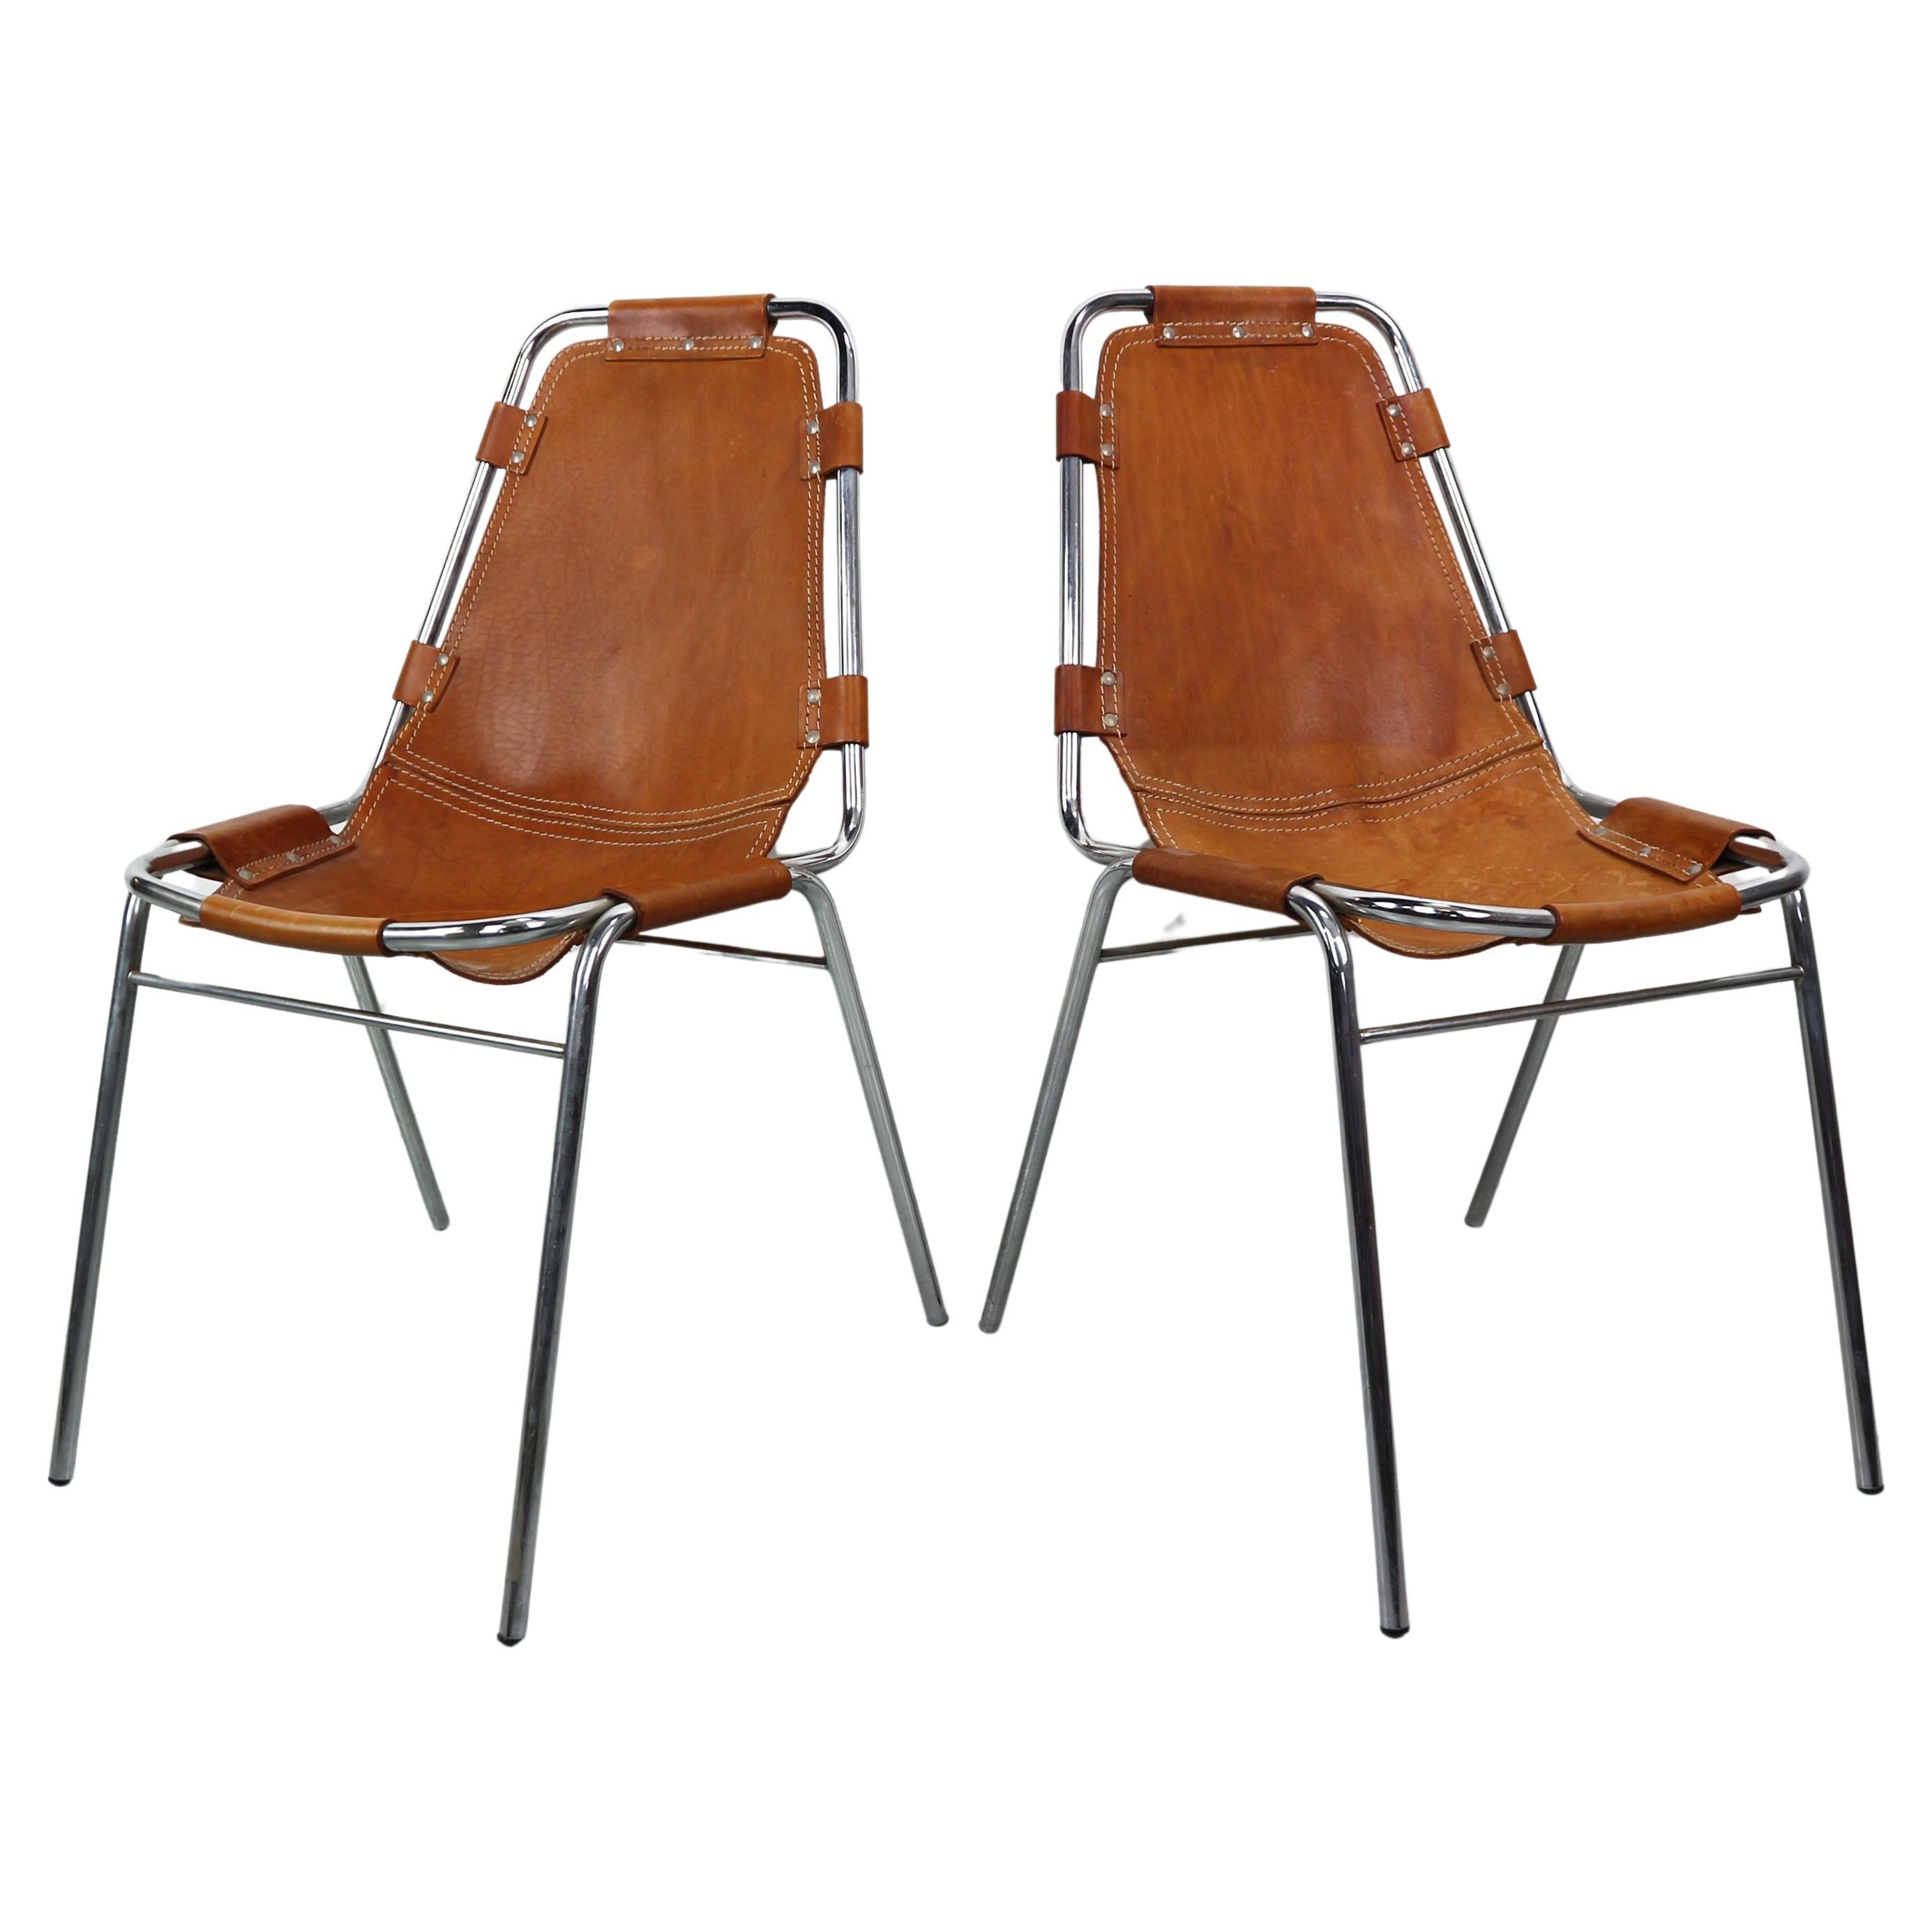 Charlotte Perriand for "Les Arc" Set of 2 Original Leather side chairs, 1960